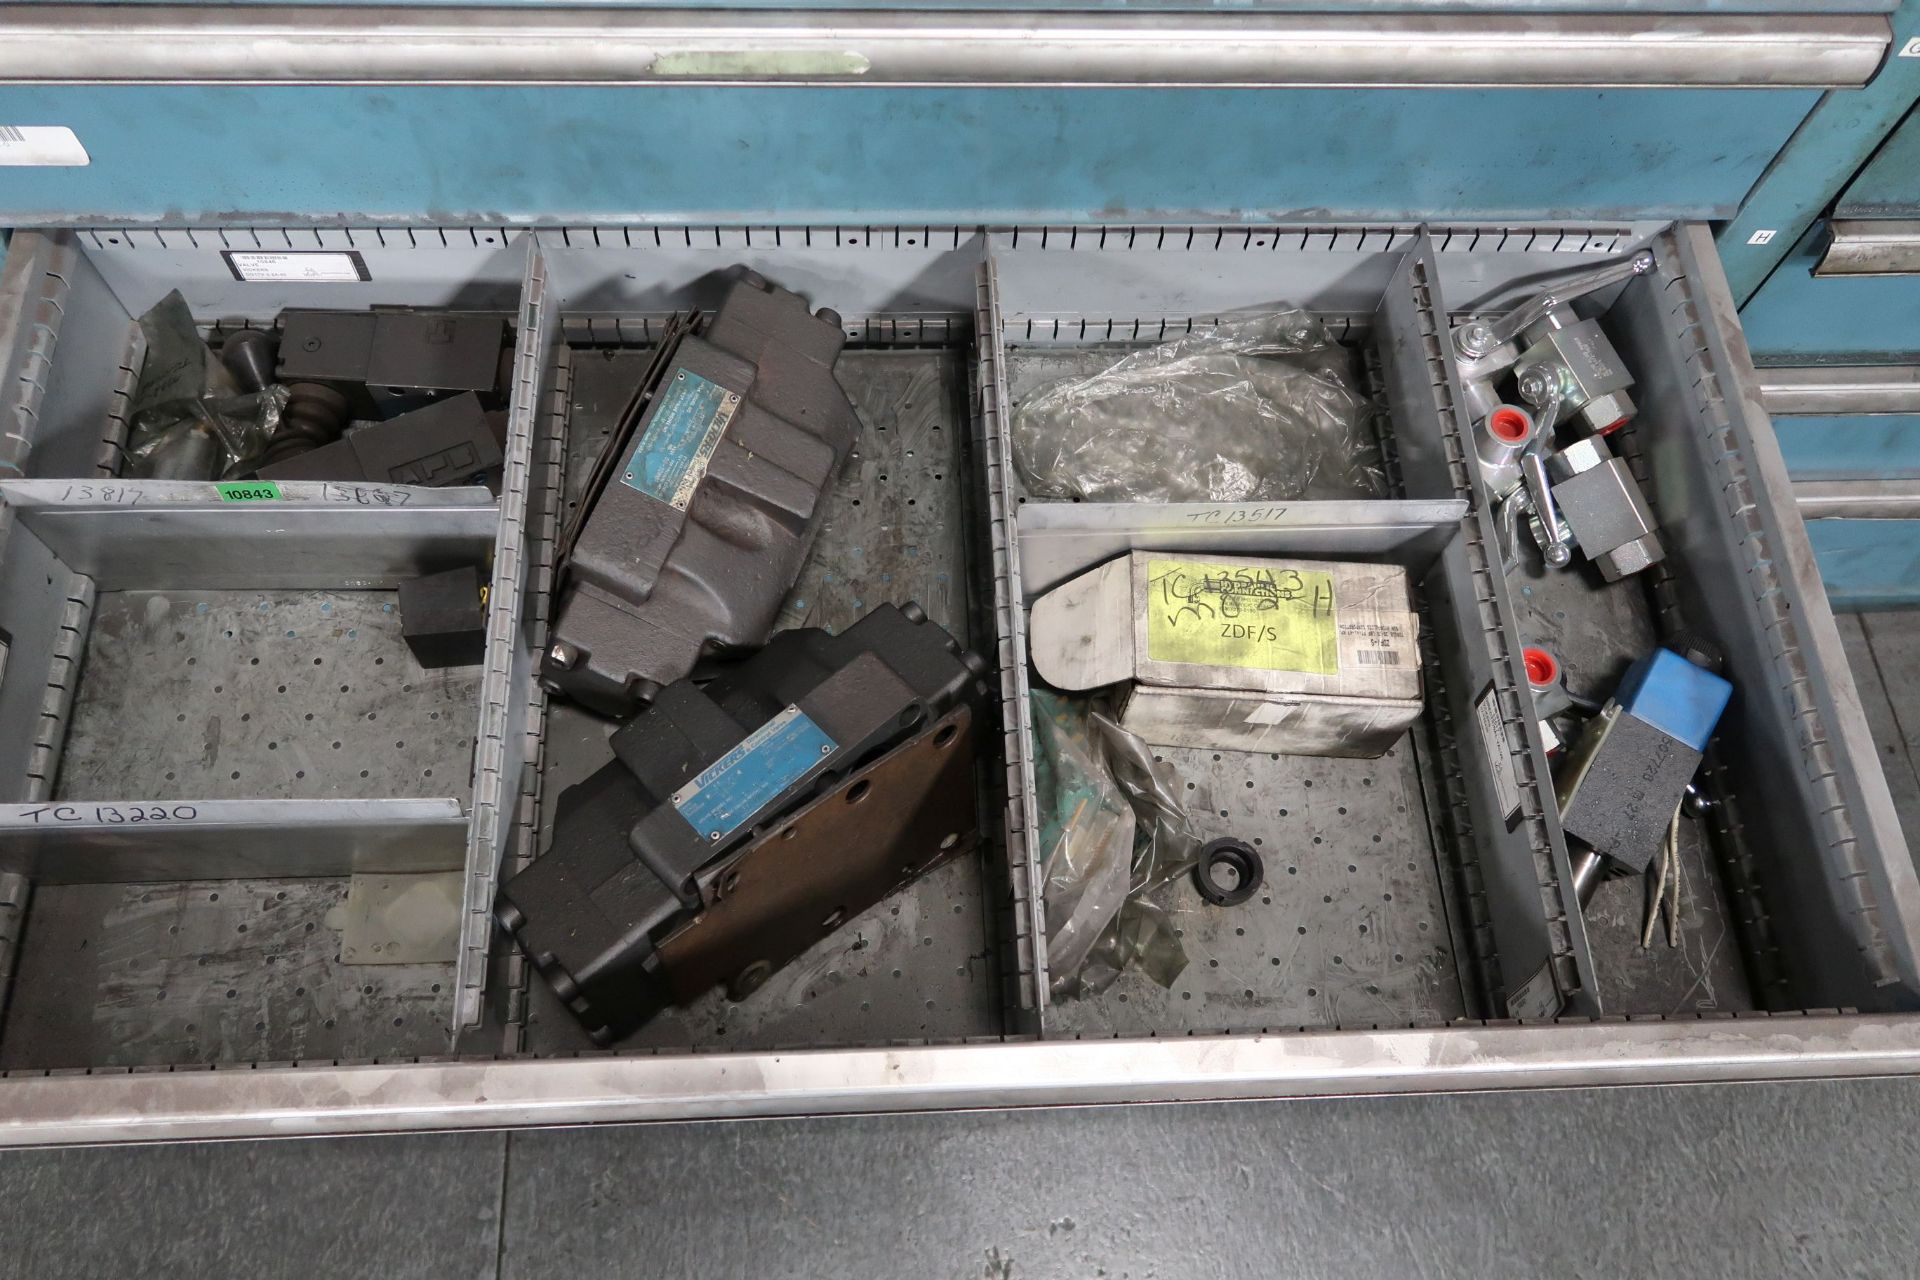 TOOLING CABINETS WITH CONTENTS - MOSTLY MACHINE PARTS **LOADING PRICE DUE TO ERRA - $2,000.00** - Image 12 of 59